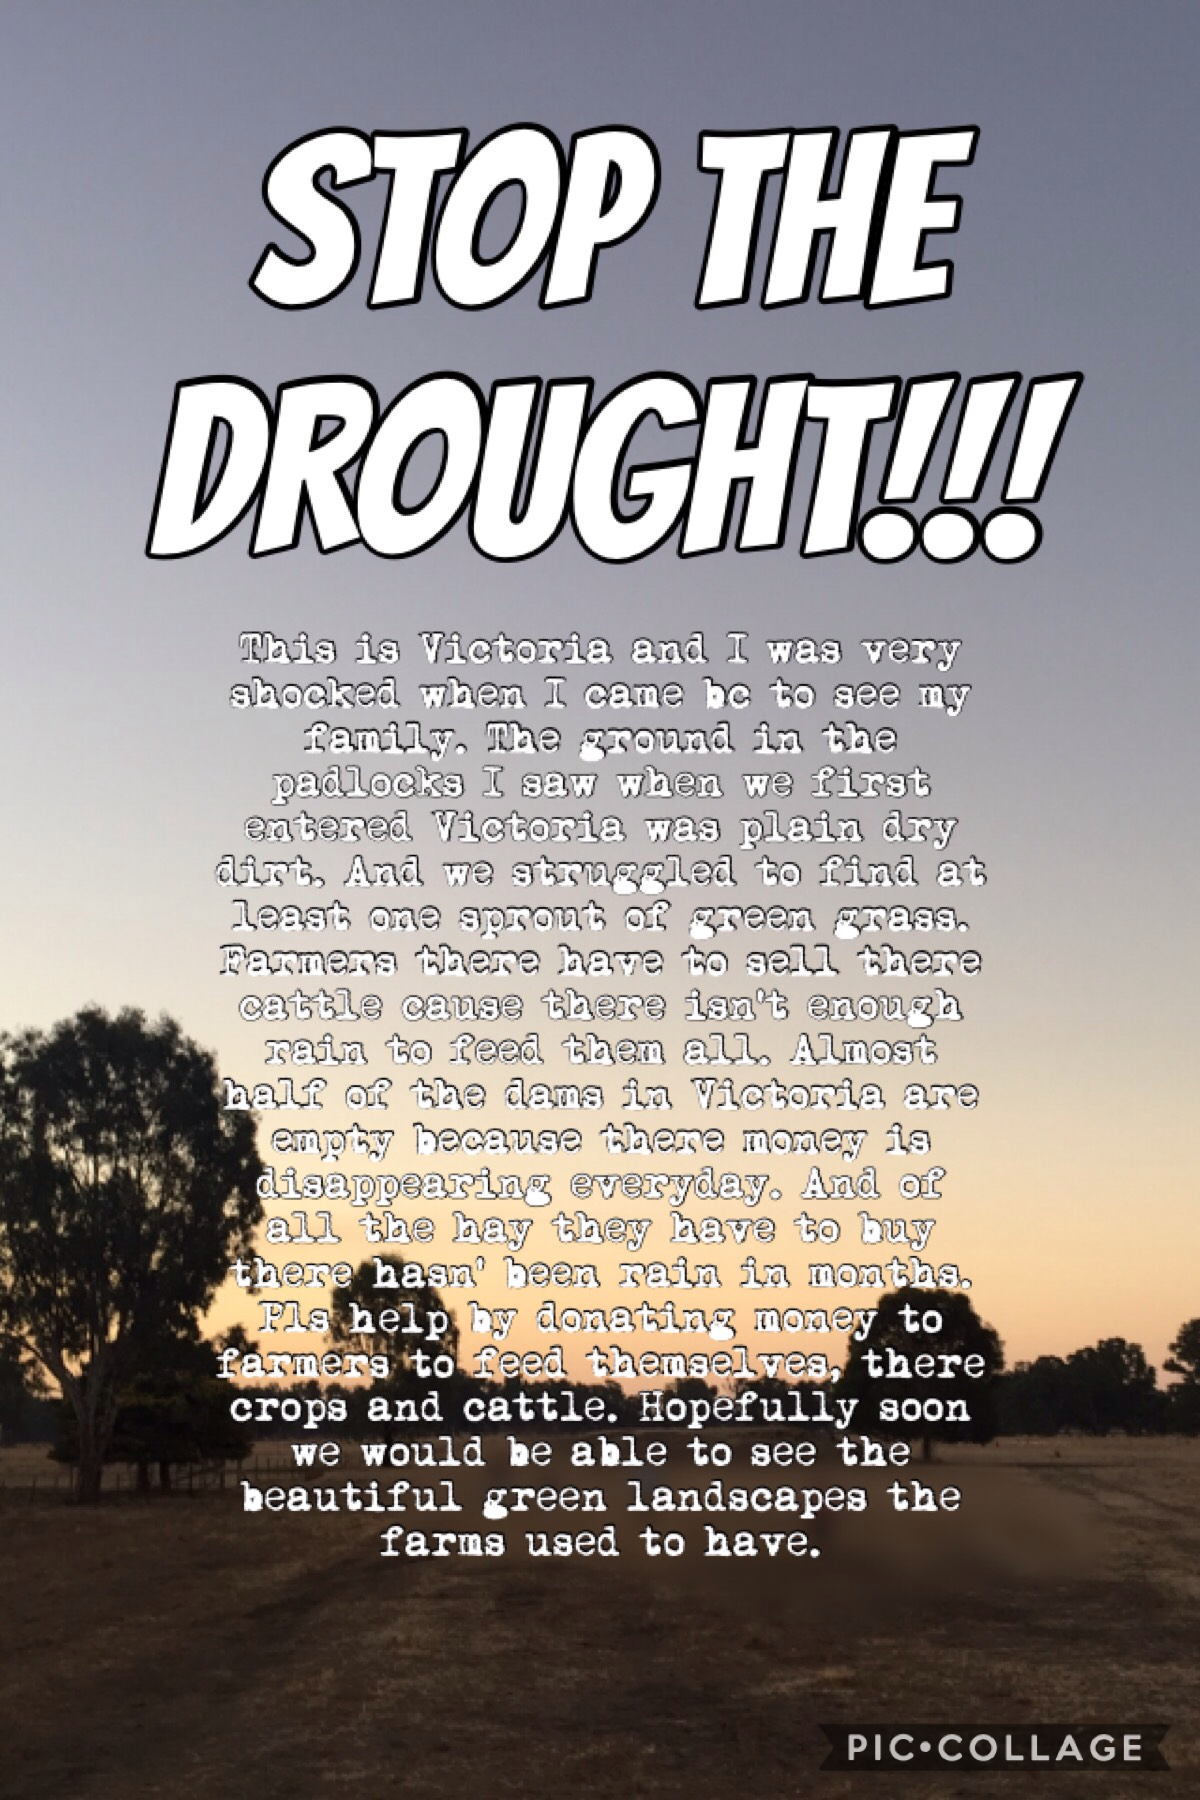 Pls help those farmers out there not only in Victoria but all over the country. Pls follow me and I will give u a update about how the farmers are coping and tips to those in the drought! Take care.😕👍🏼💩✌️